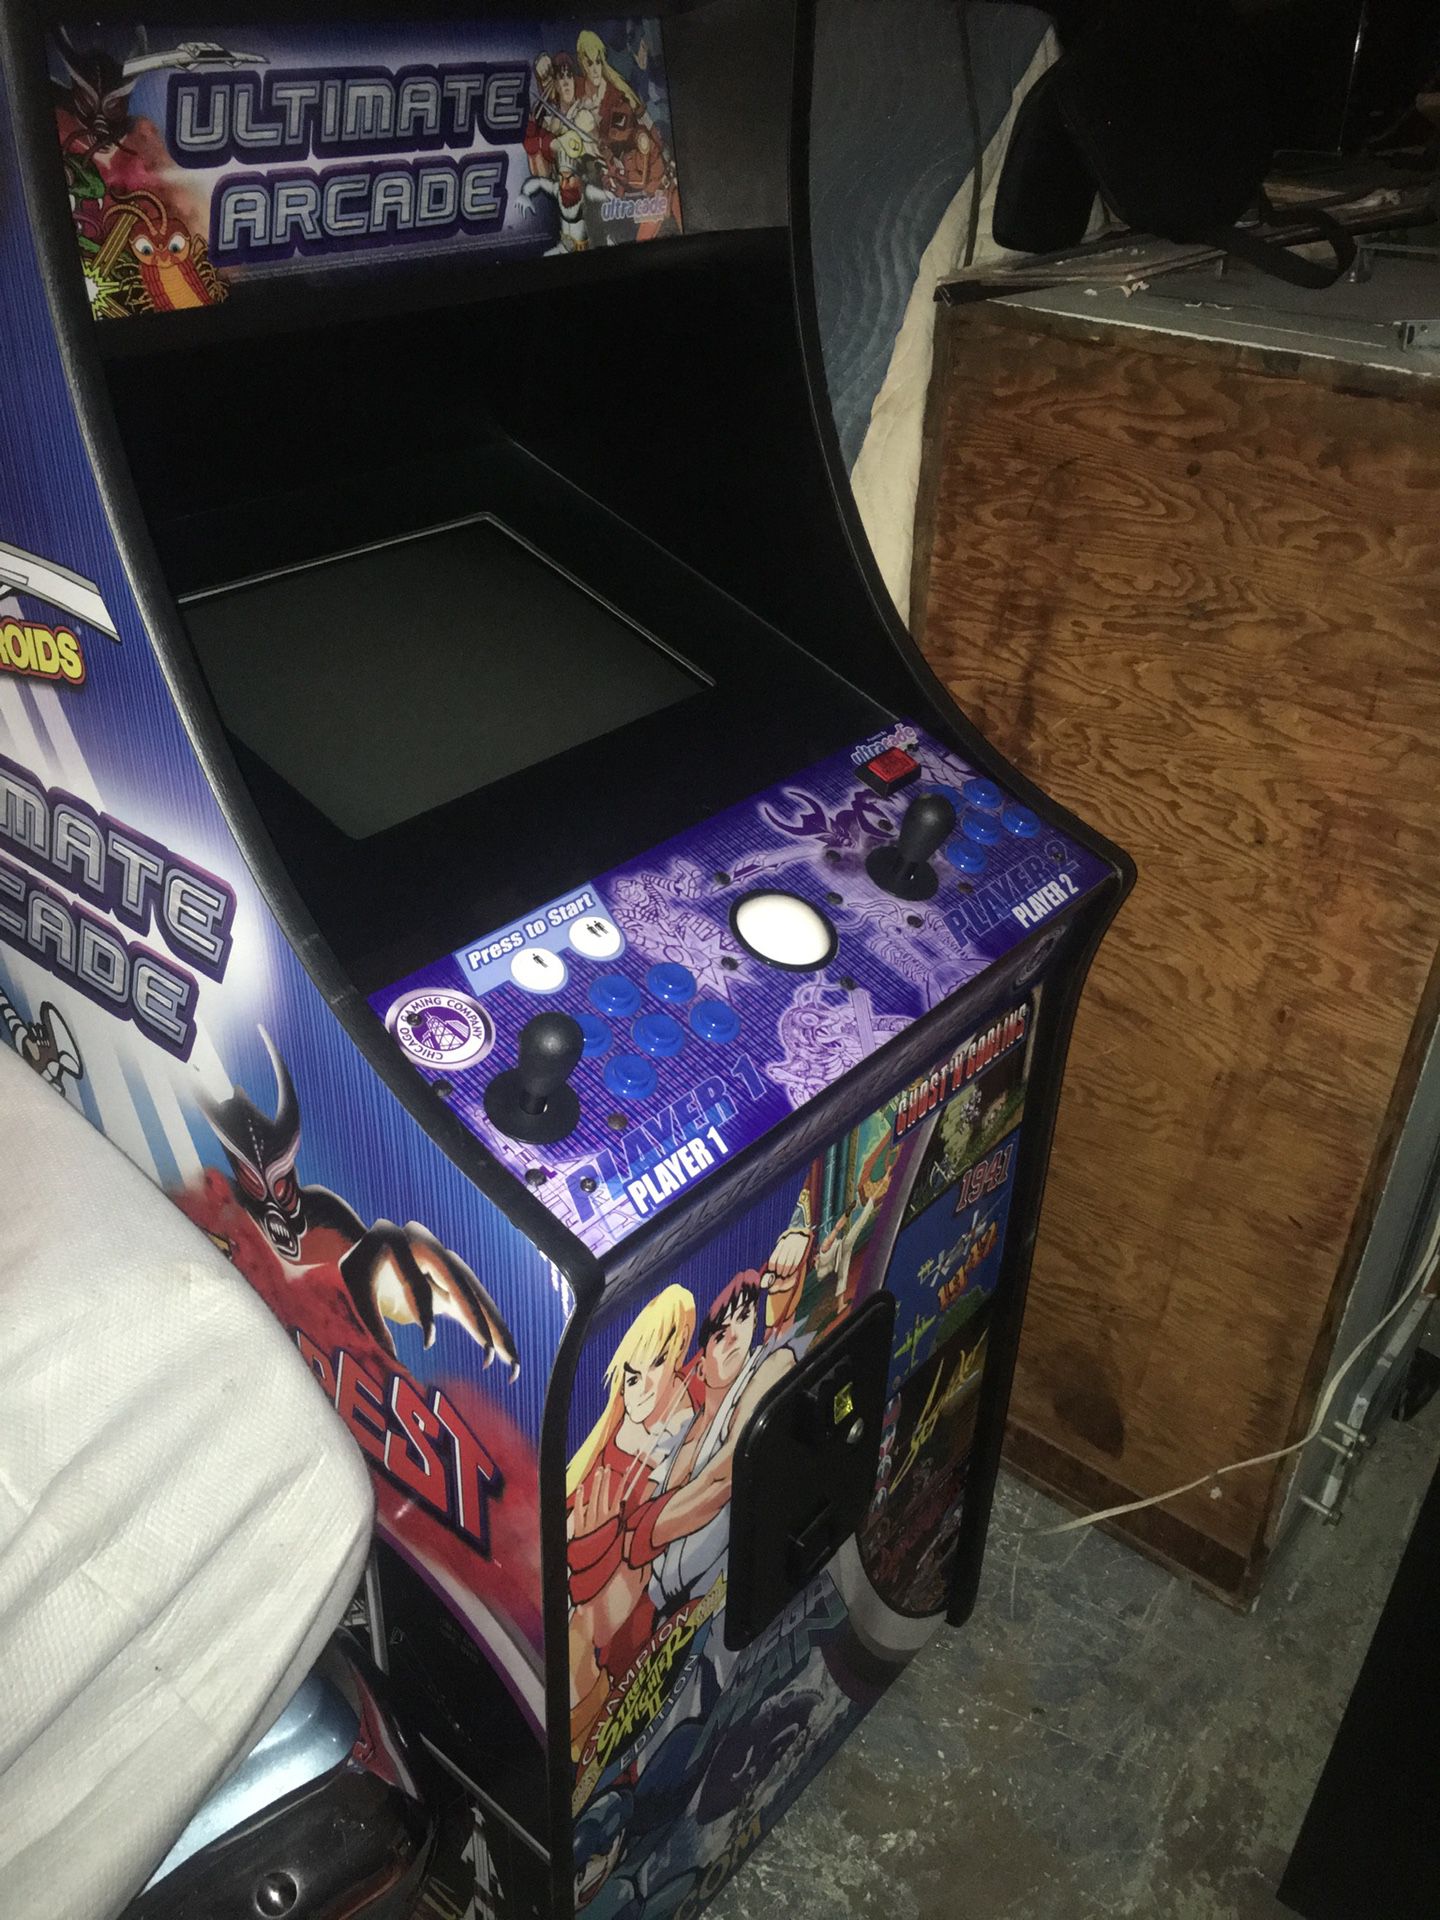 Ultimate arcade (Chicago gaming)